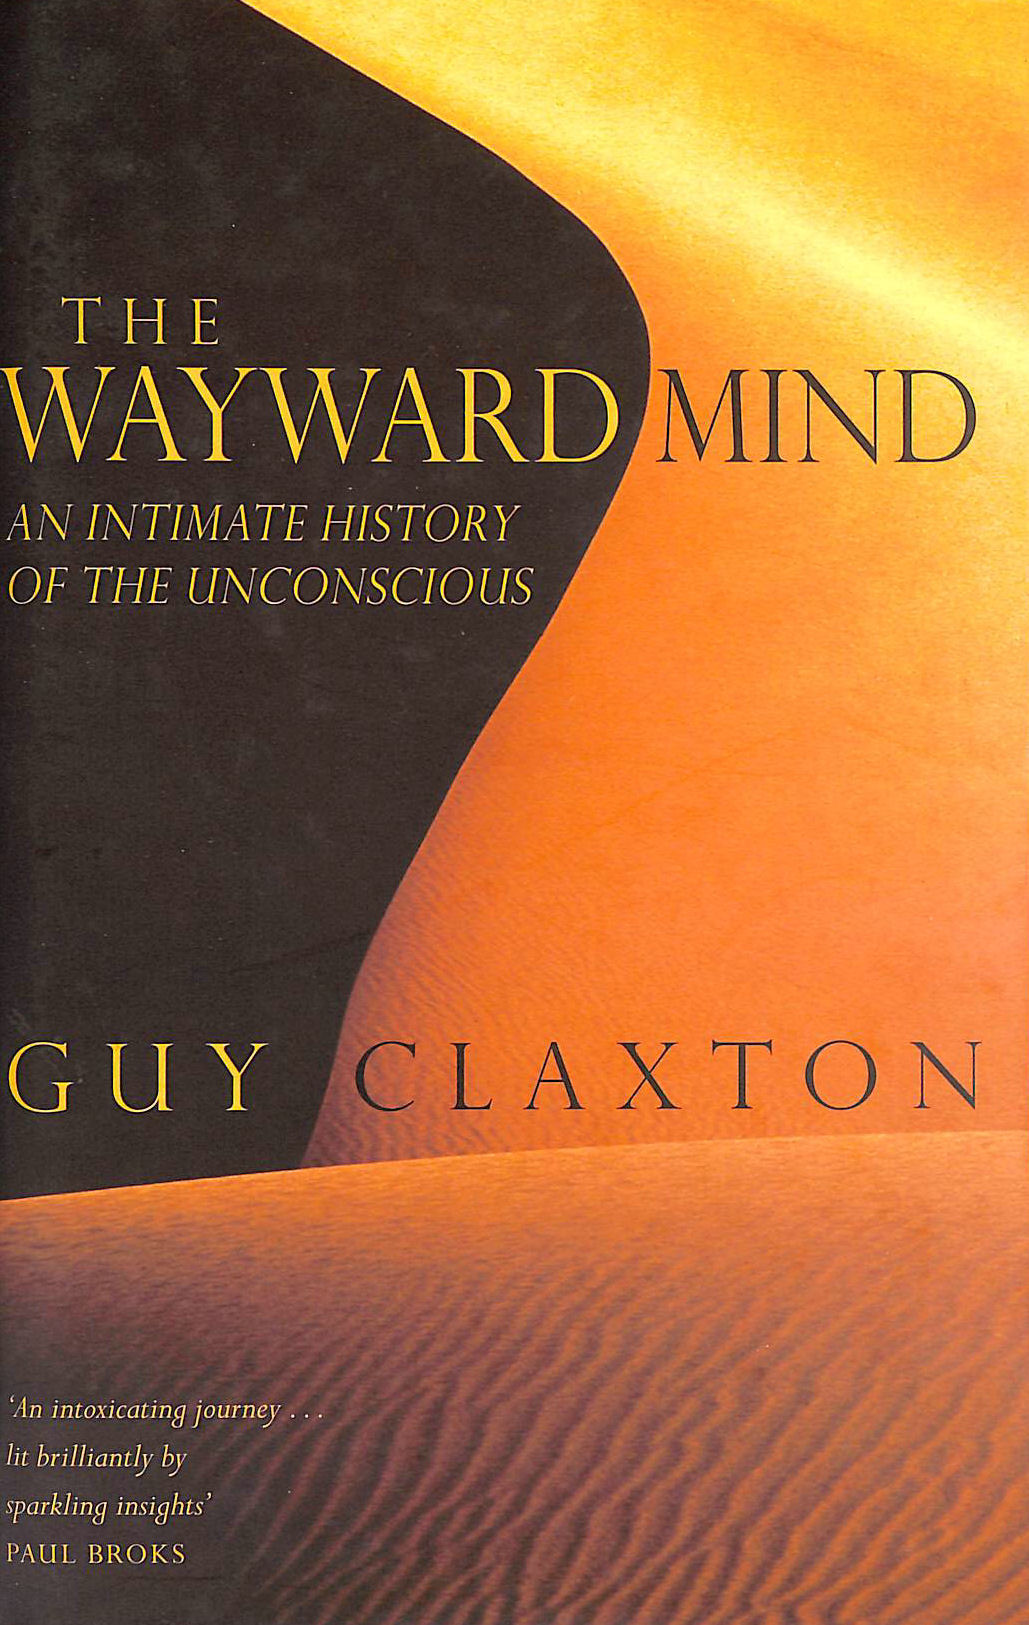 CLAXTON, GUY - The Wayward Mind: An Intimate History of the Unconscious